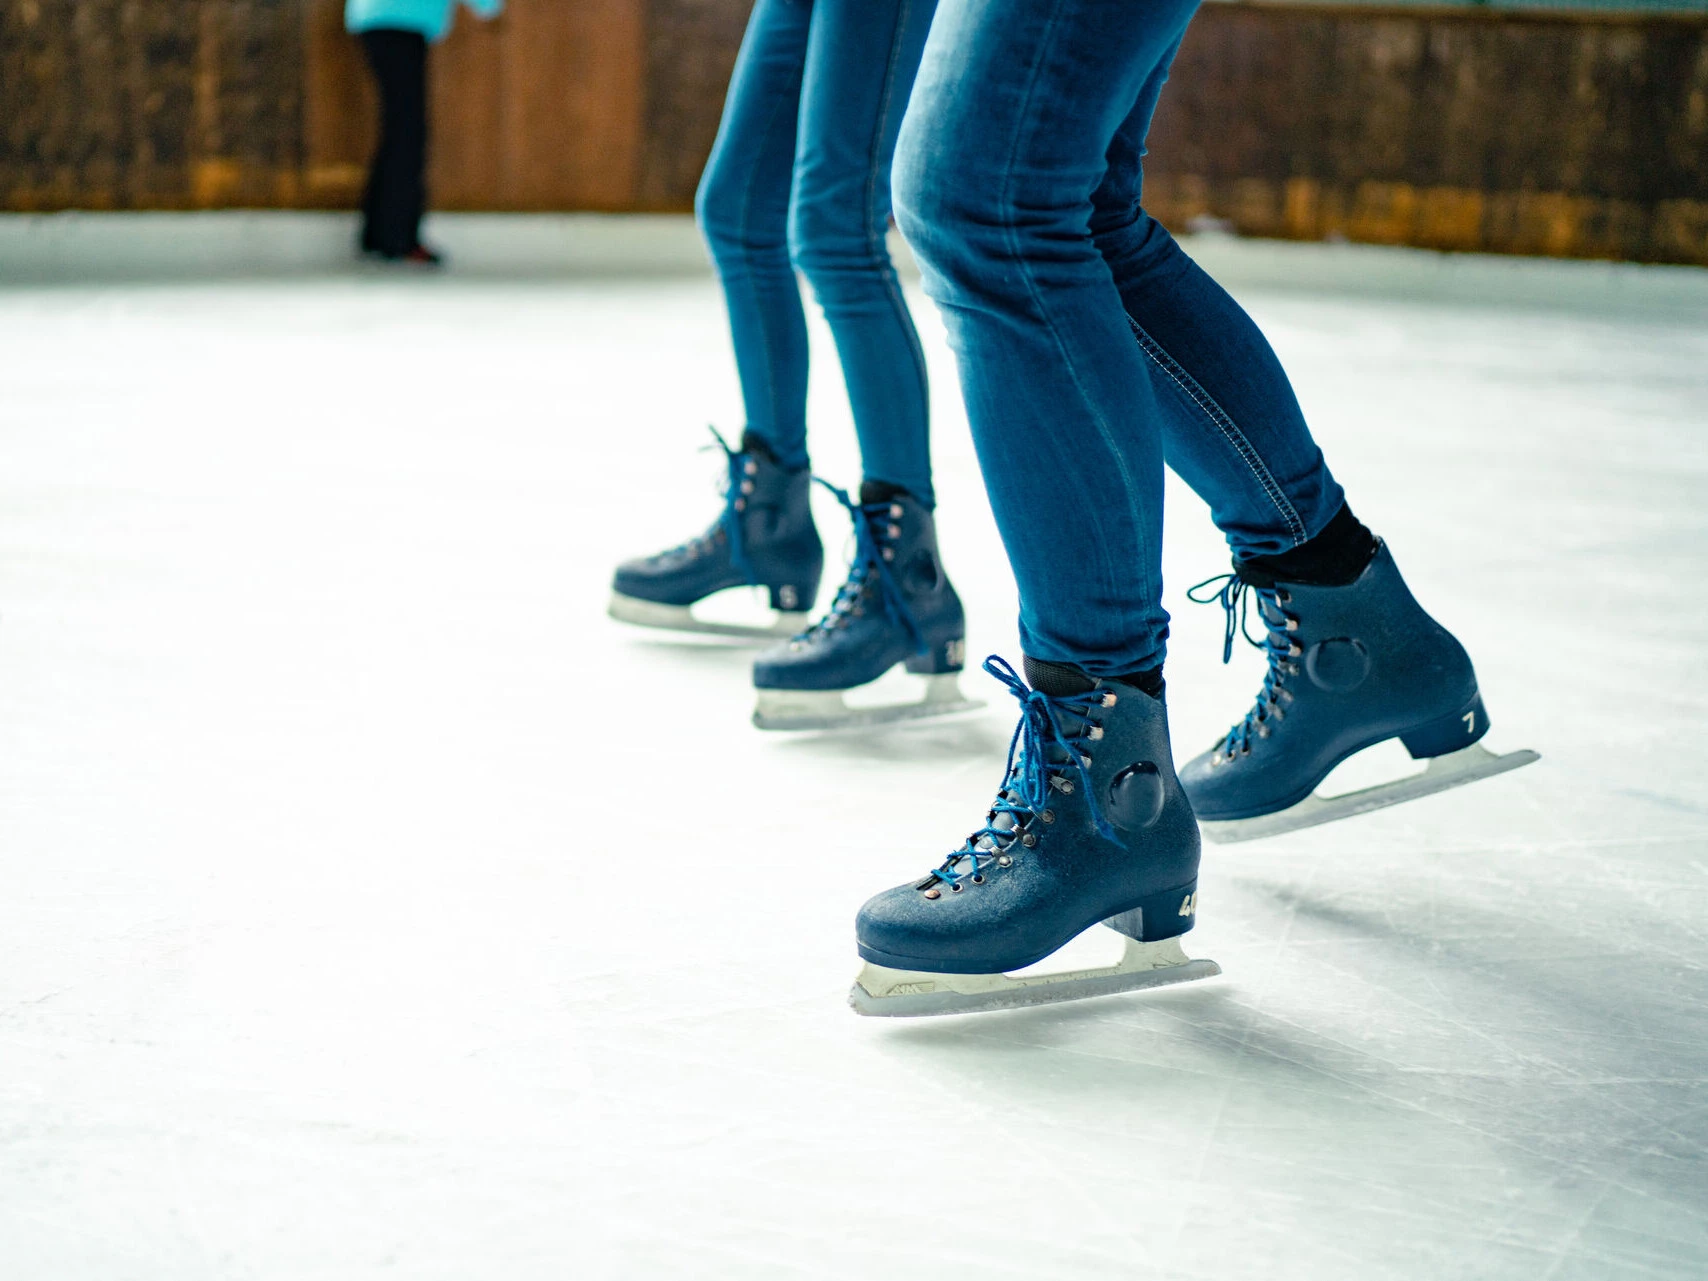 We know the best places for skating. Come with us on the ice...